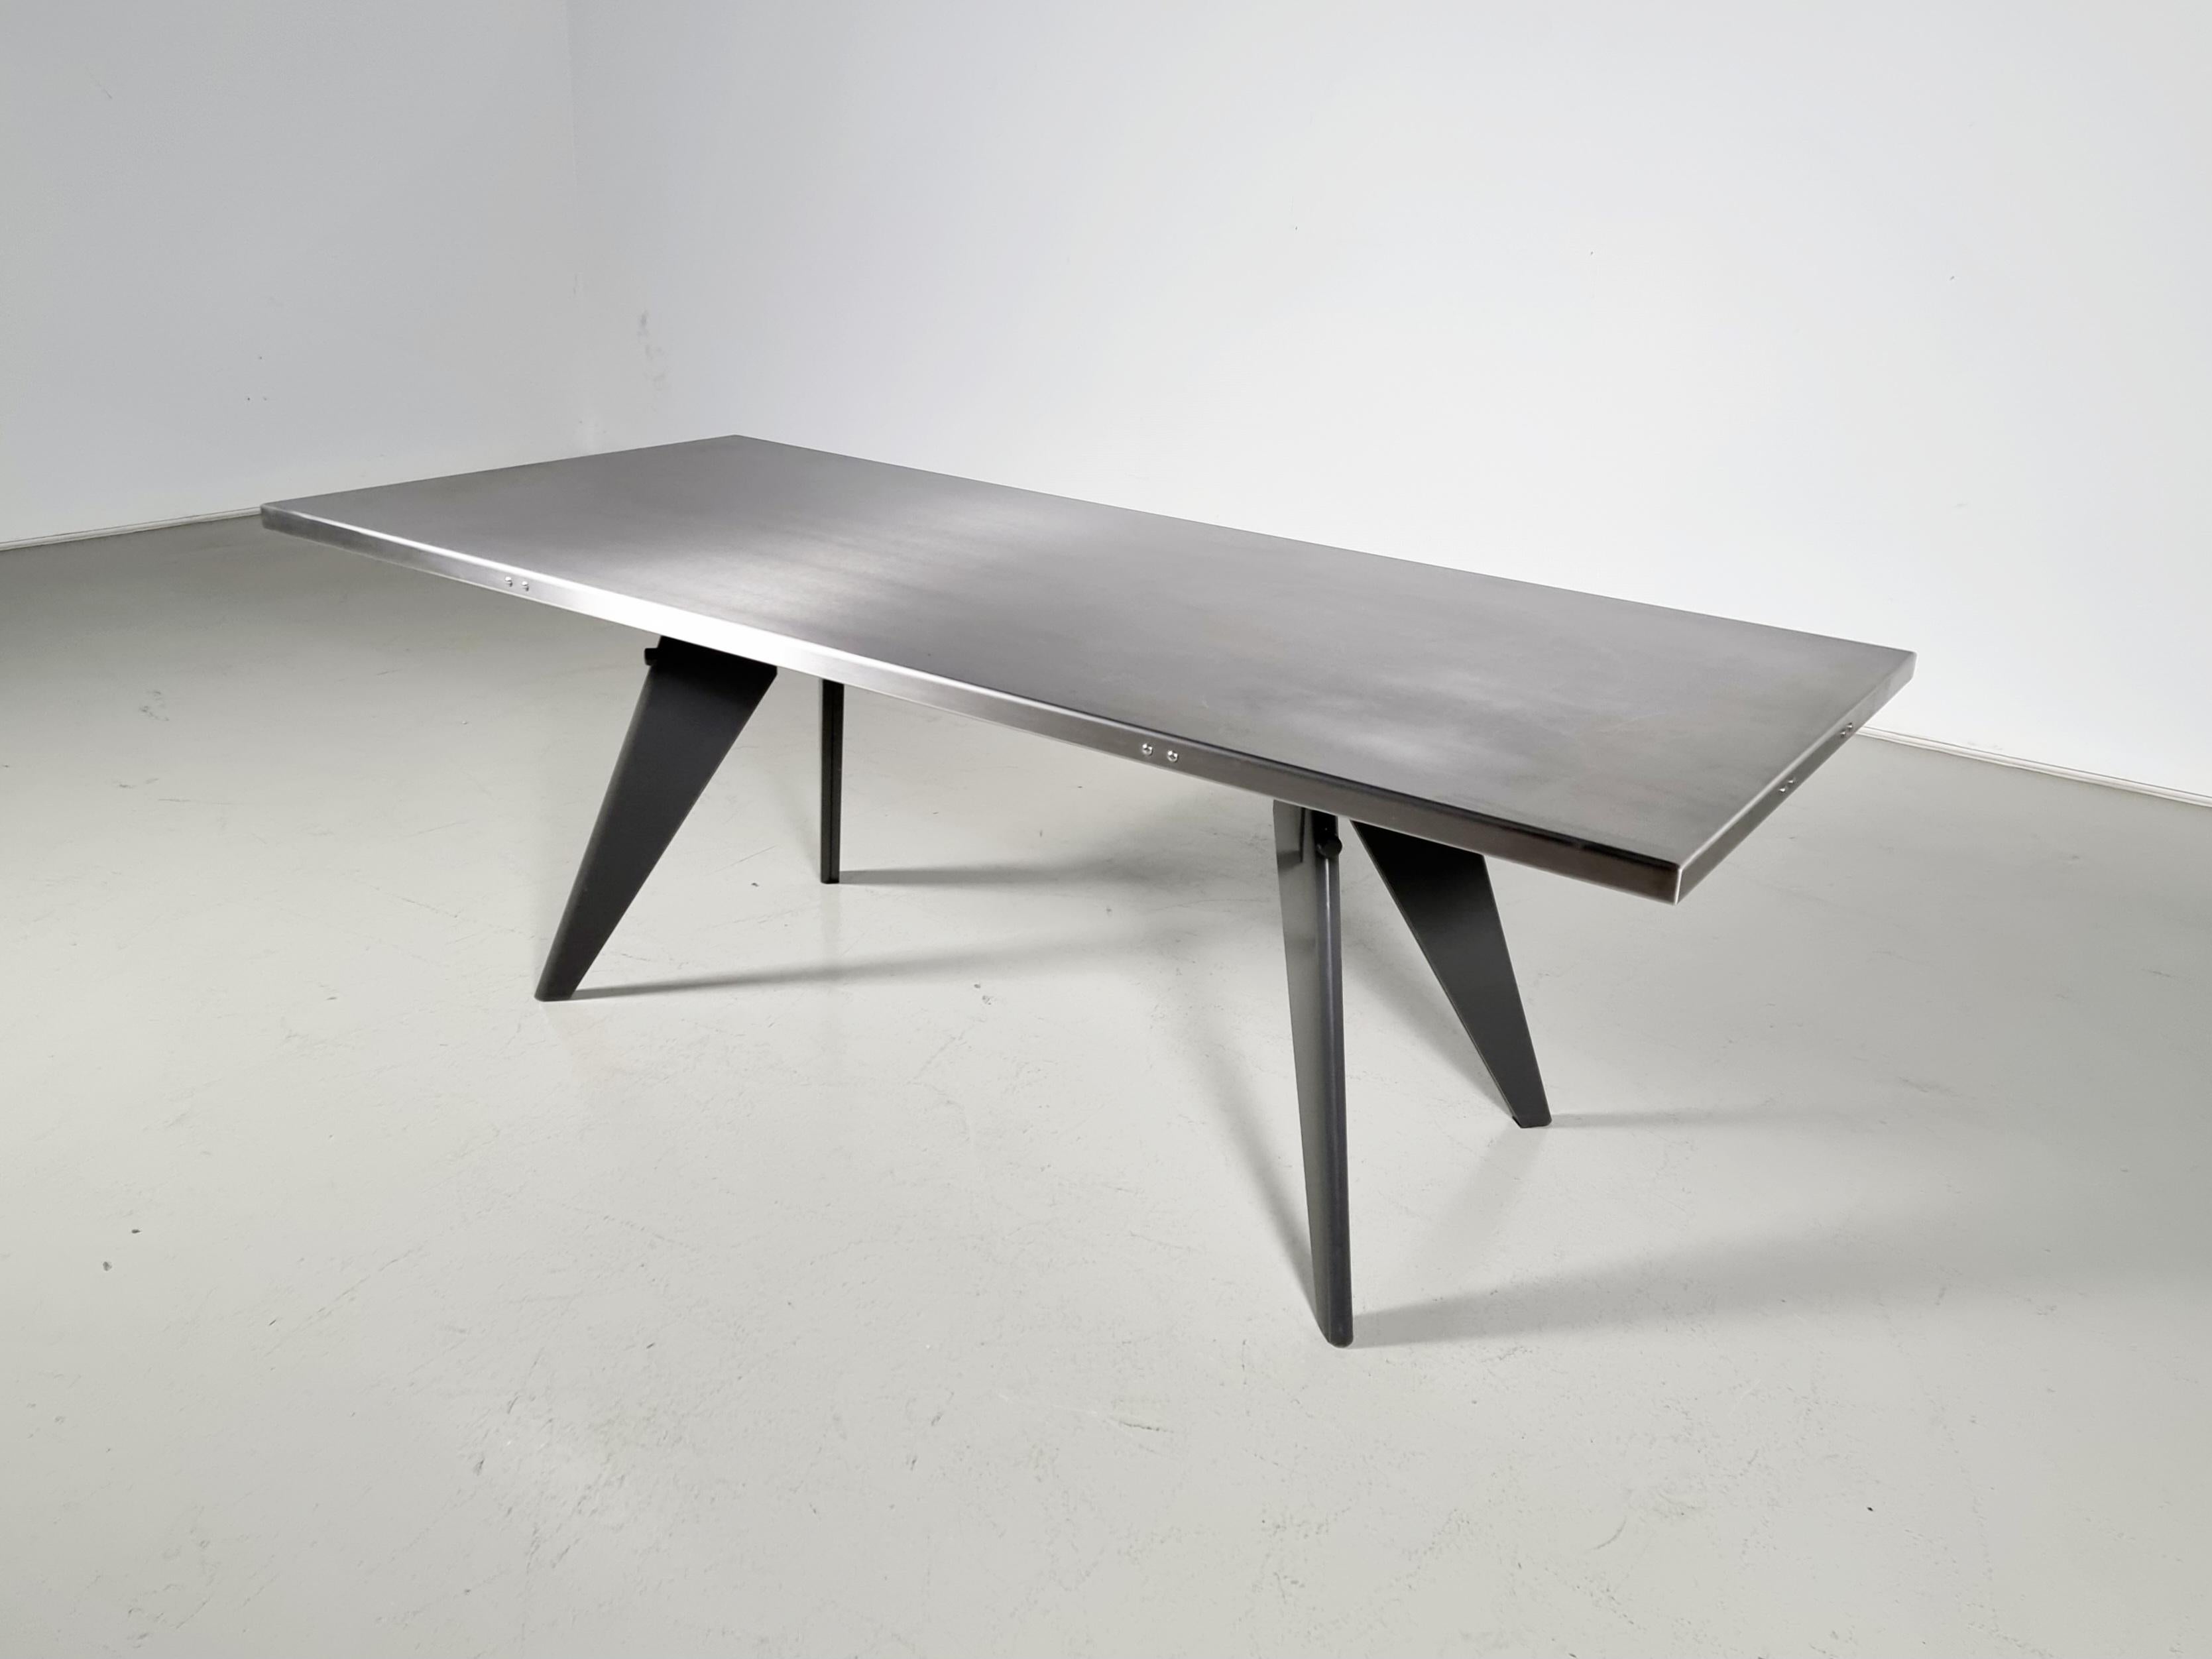 Jean Prouve by G-Star Raw for Vitra S.A.M. Tropique Table with matching chairs 1